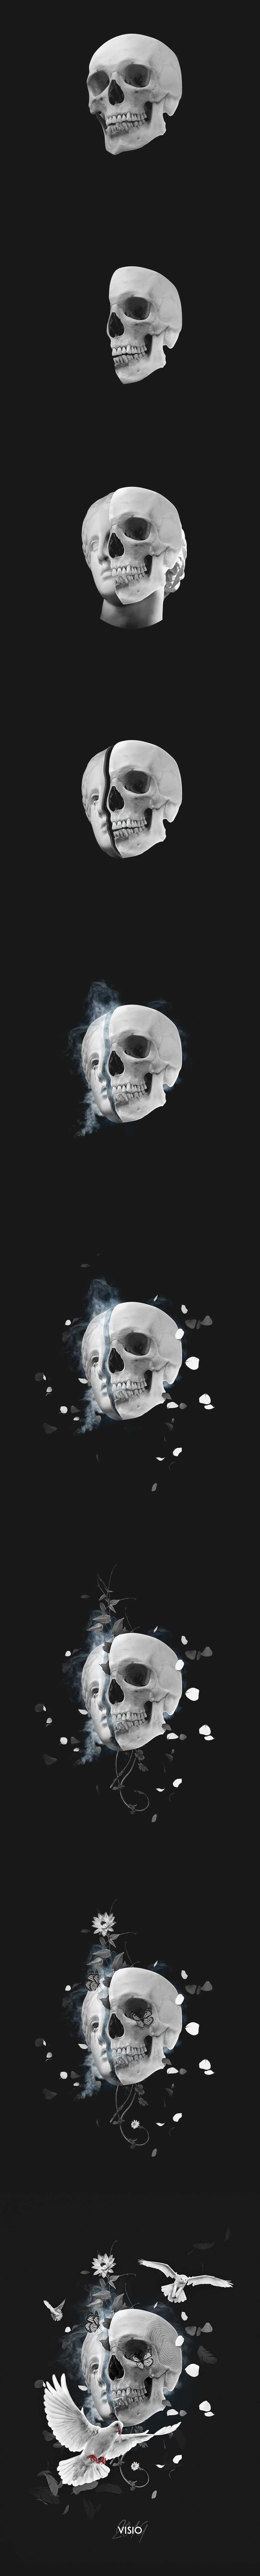 skull live pain tear Space  birds pure emotion Level Up wallpaper